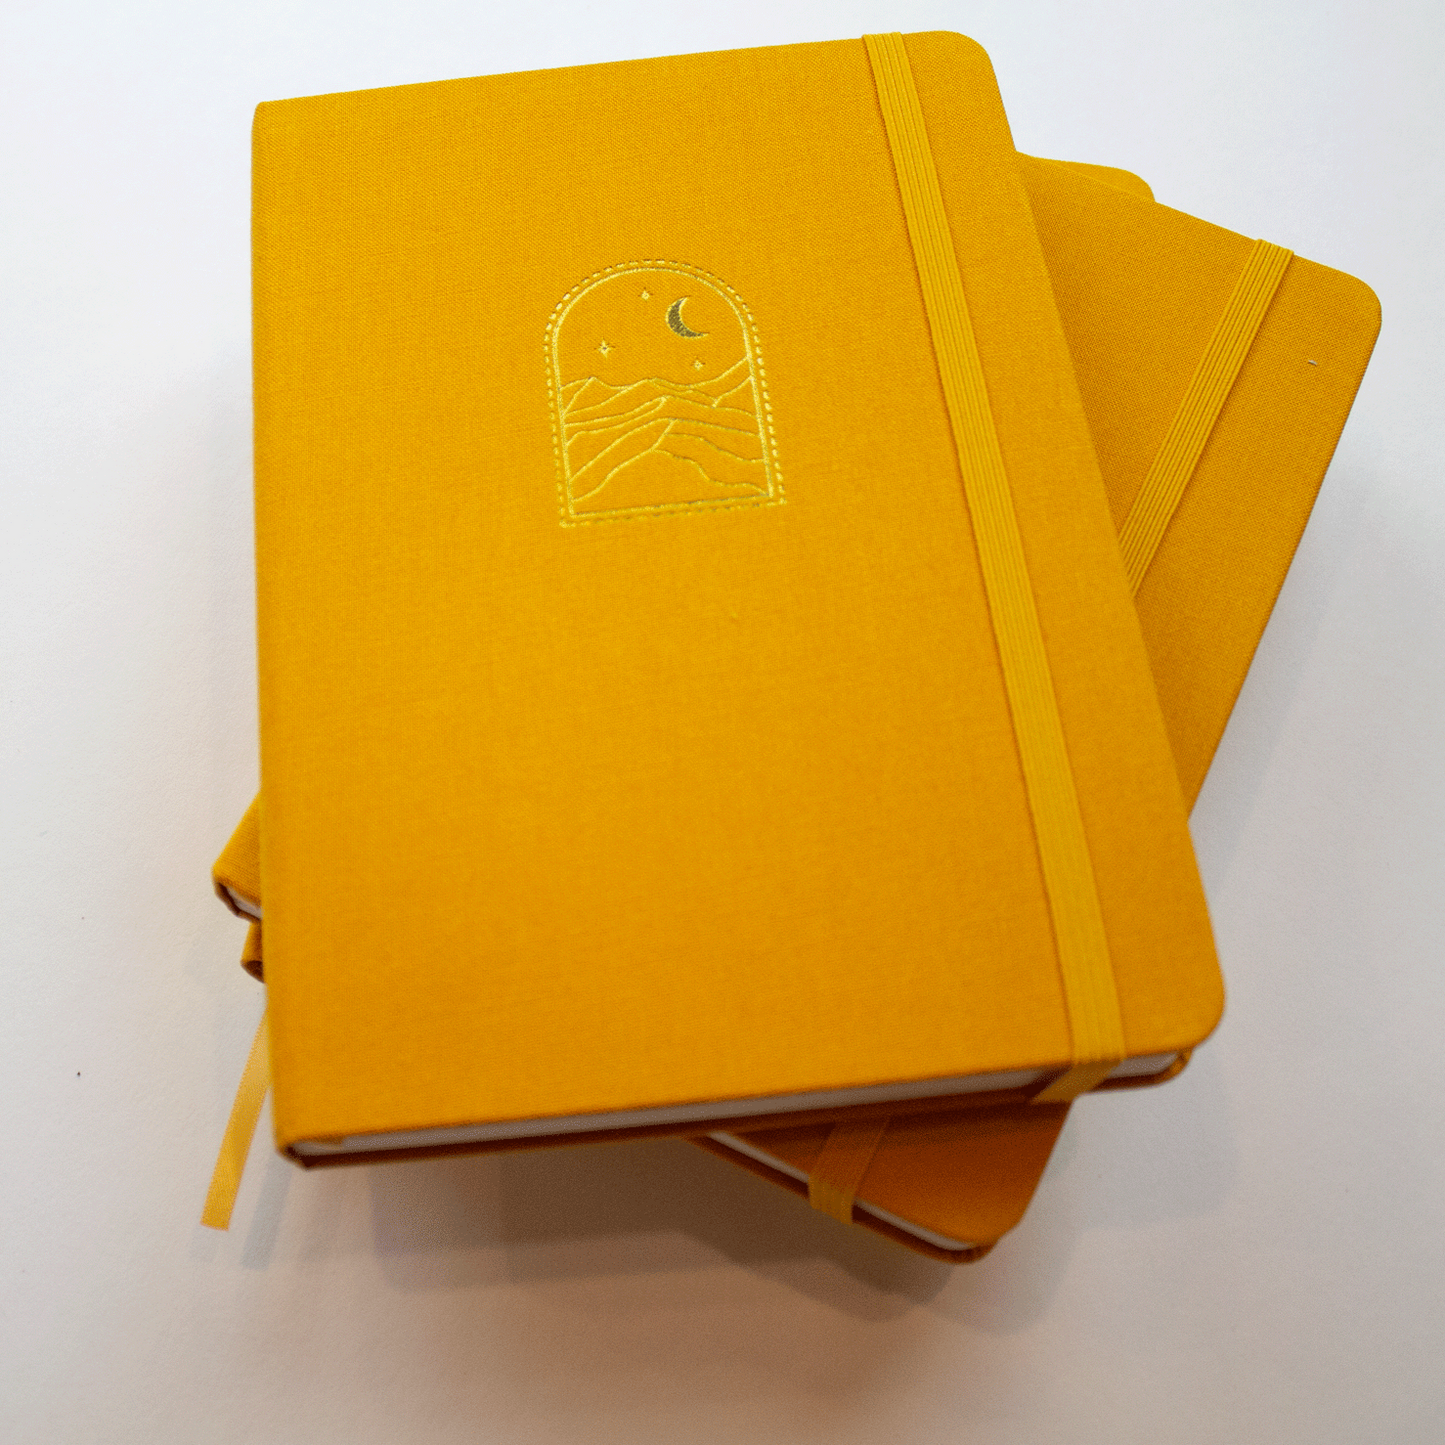 A stack of three mustard yellow "Golden Dunes" bobo dot grid journals. The gold stamped starry night sky and sand dune illustration on the front cover can be seen on the first book. Their matching yellow elastic closures and ribbon bookmarks can also be seen. 